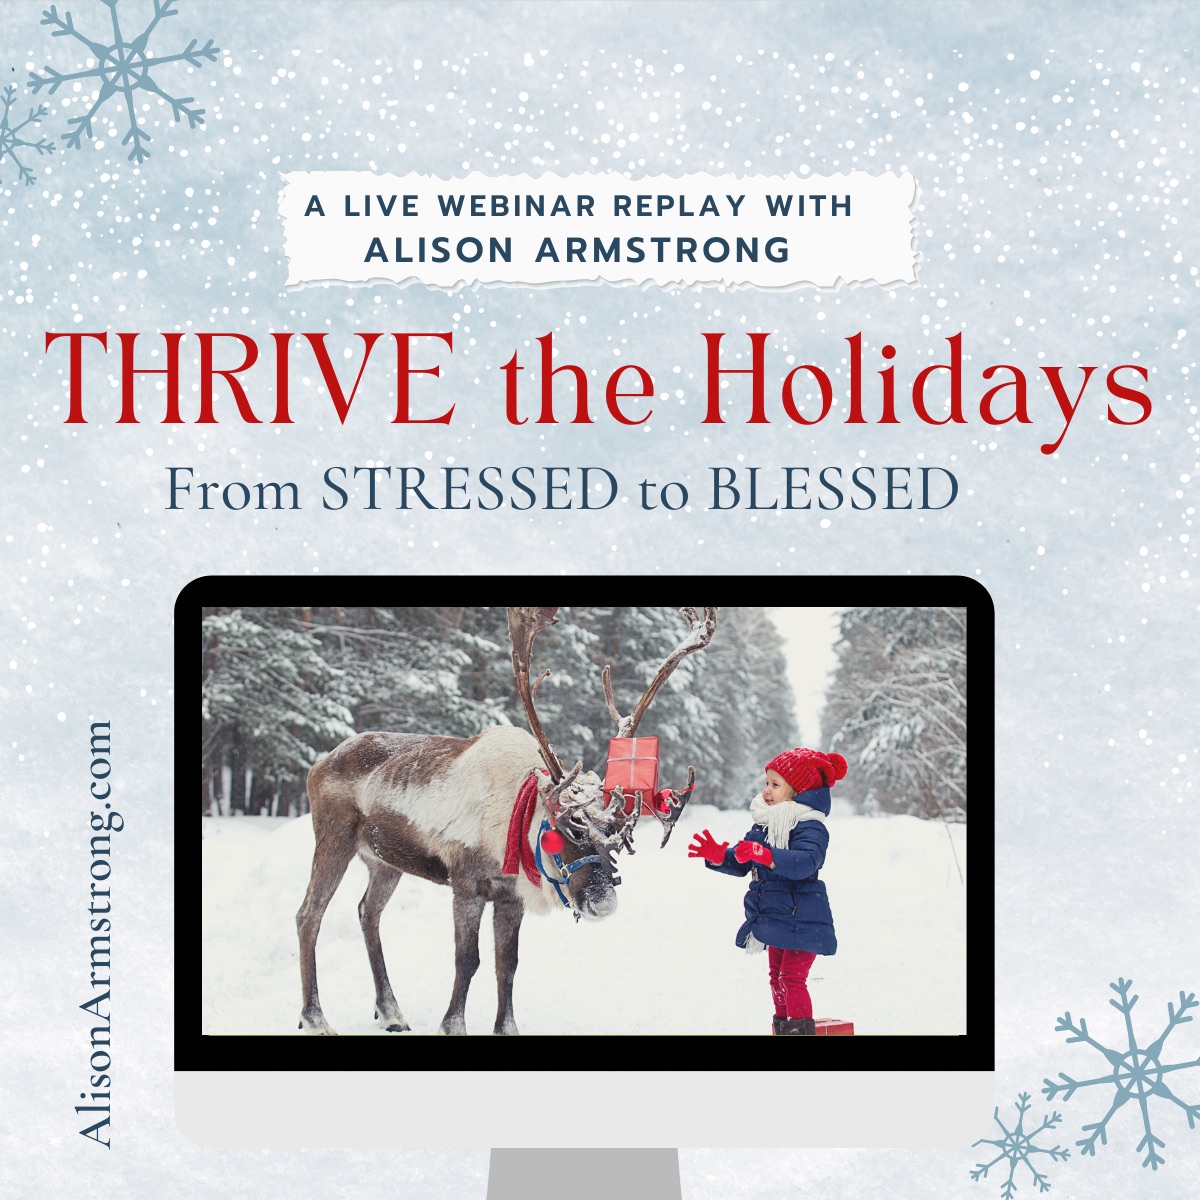 Thrive the Holidays, from Stressed to Blessed